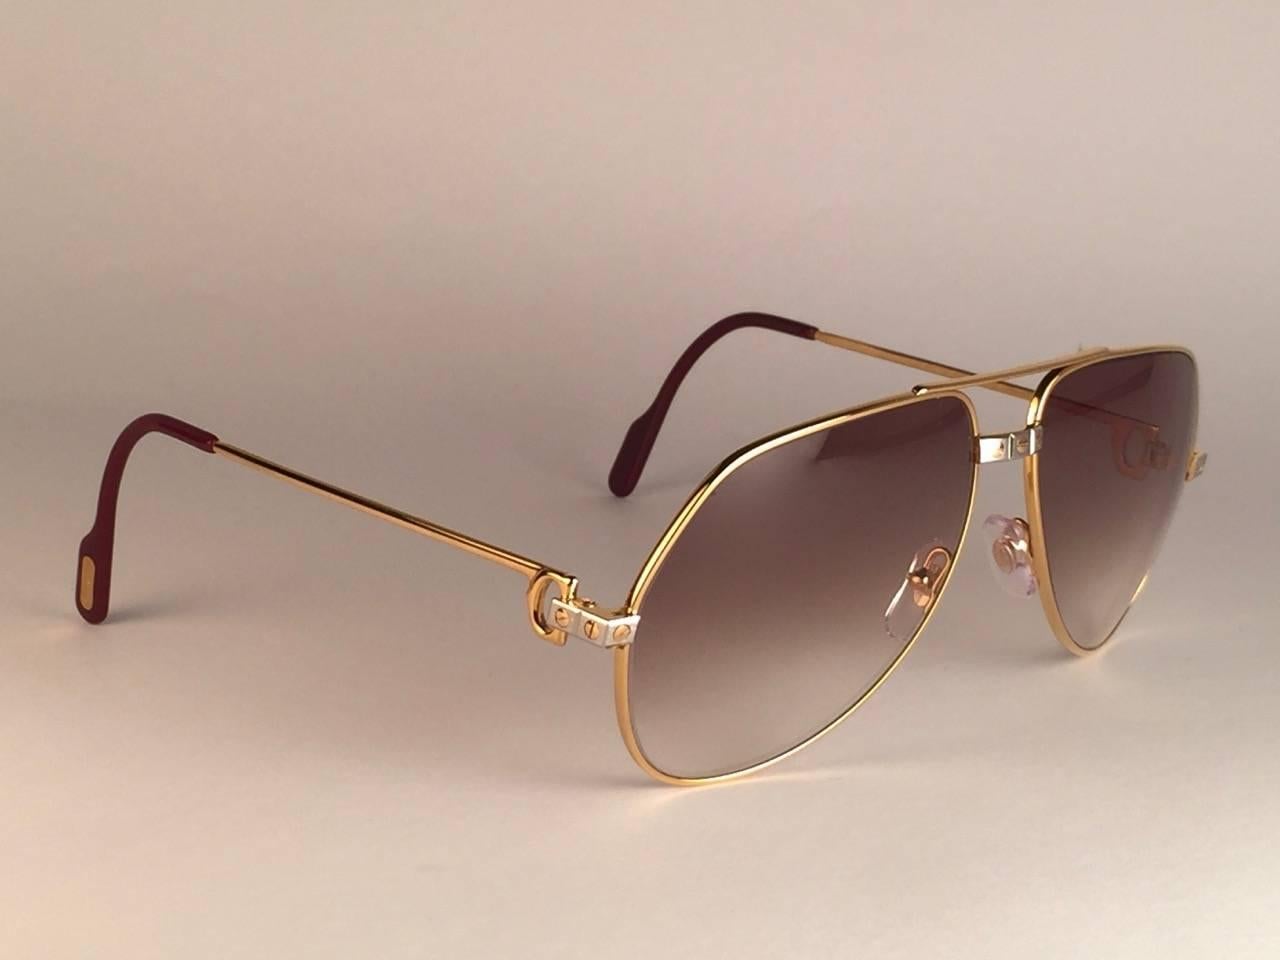 New Cartier Santos Screws 1983 62mm 18K Heavy Plated Sunglasses France For Sale 1